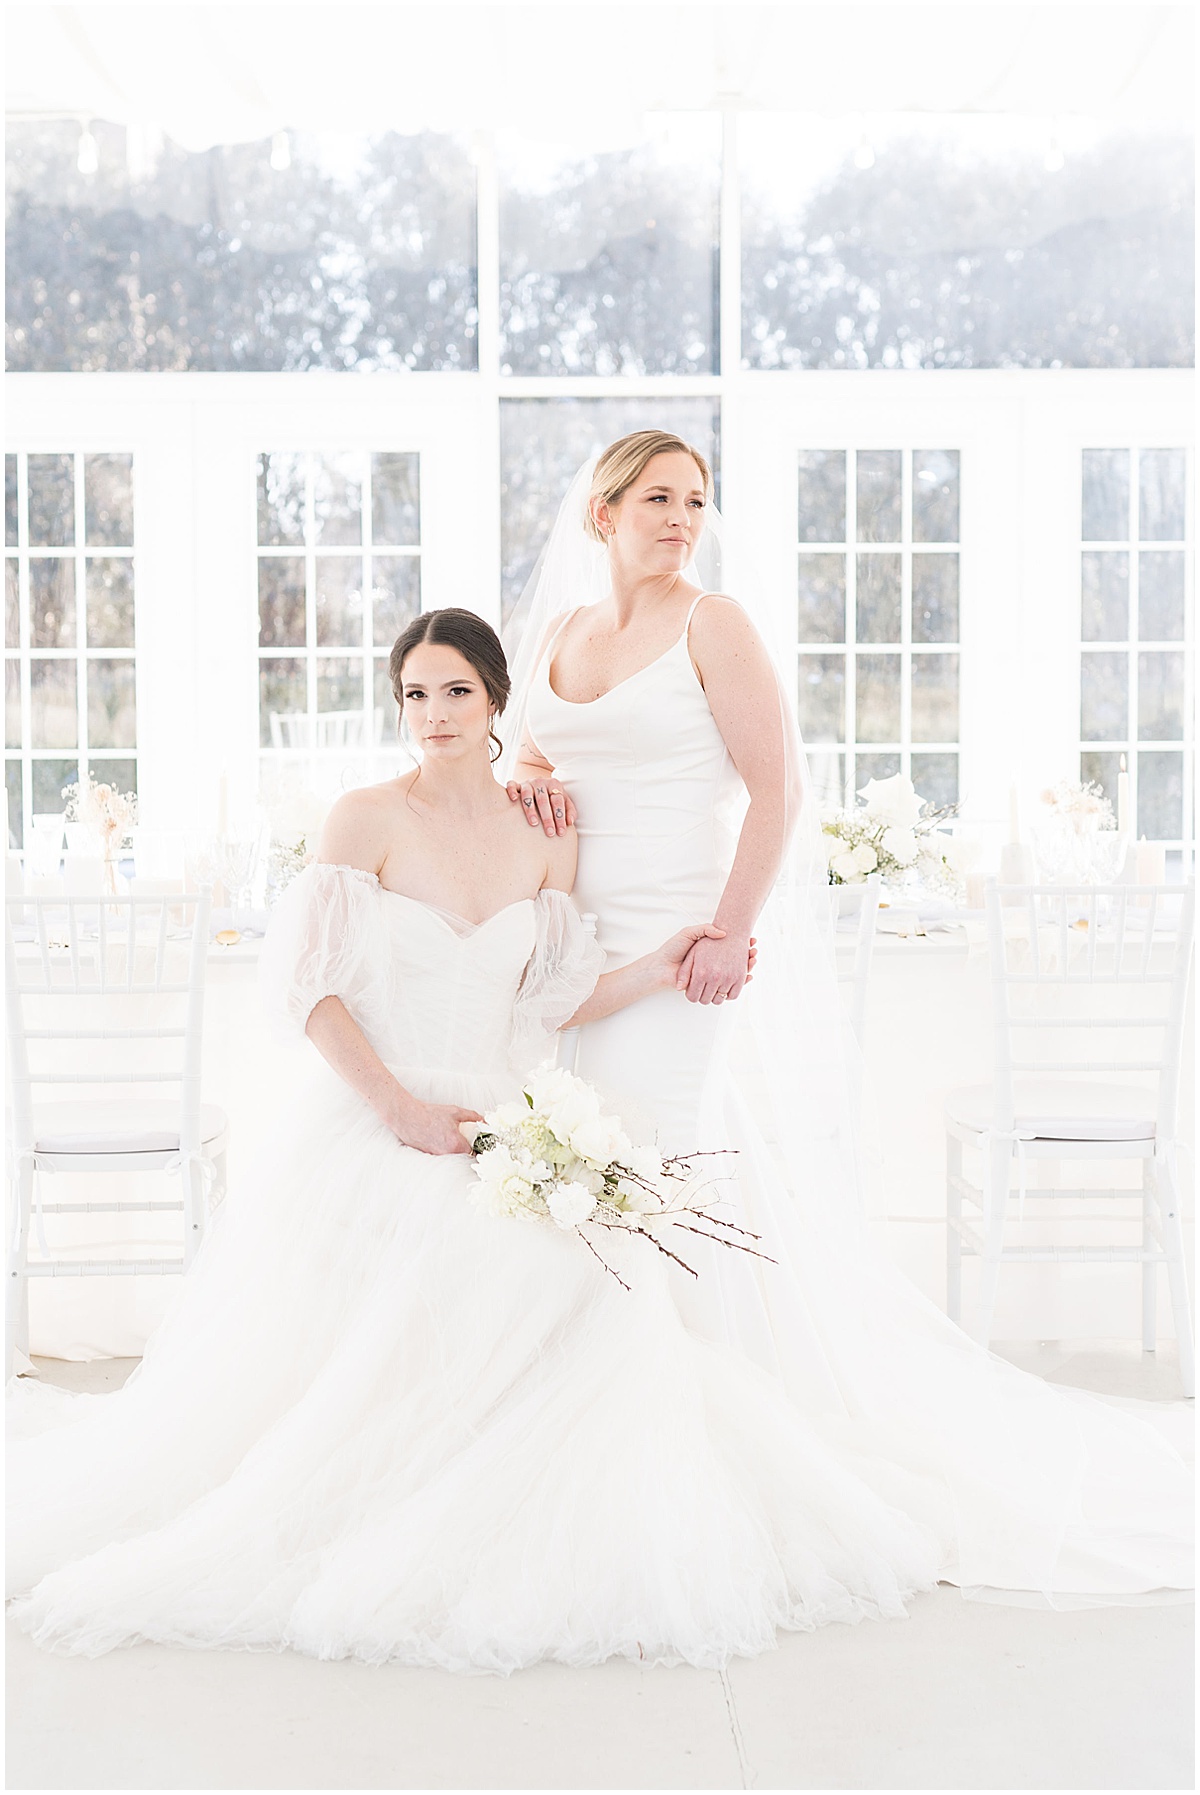 Brides holding hands after winter wedding at The Ritz Charles Garden Pavilion in Carmel, Indiana photographed by Victoria Rayburn Photography